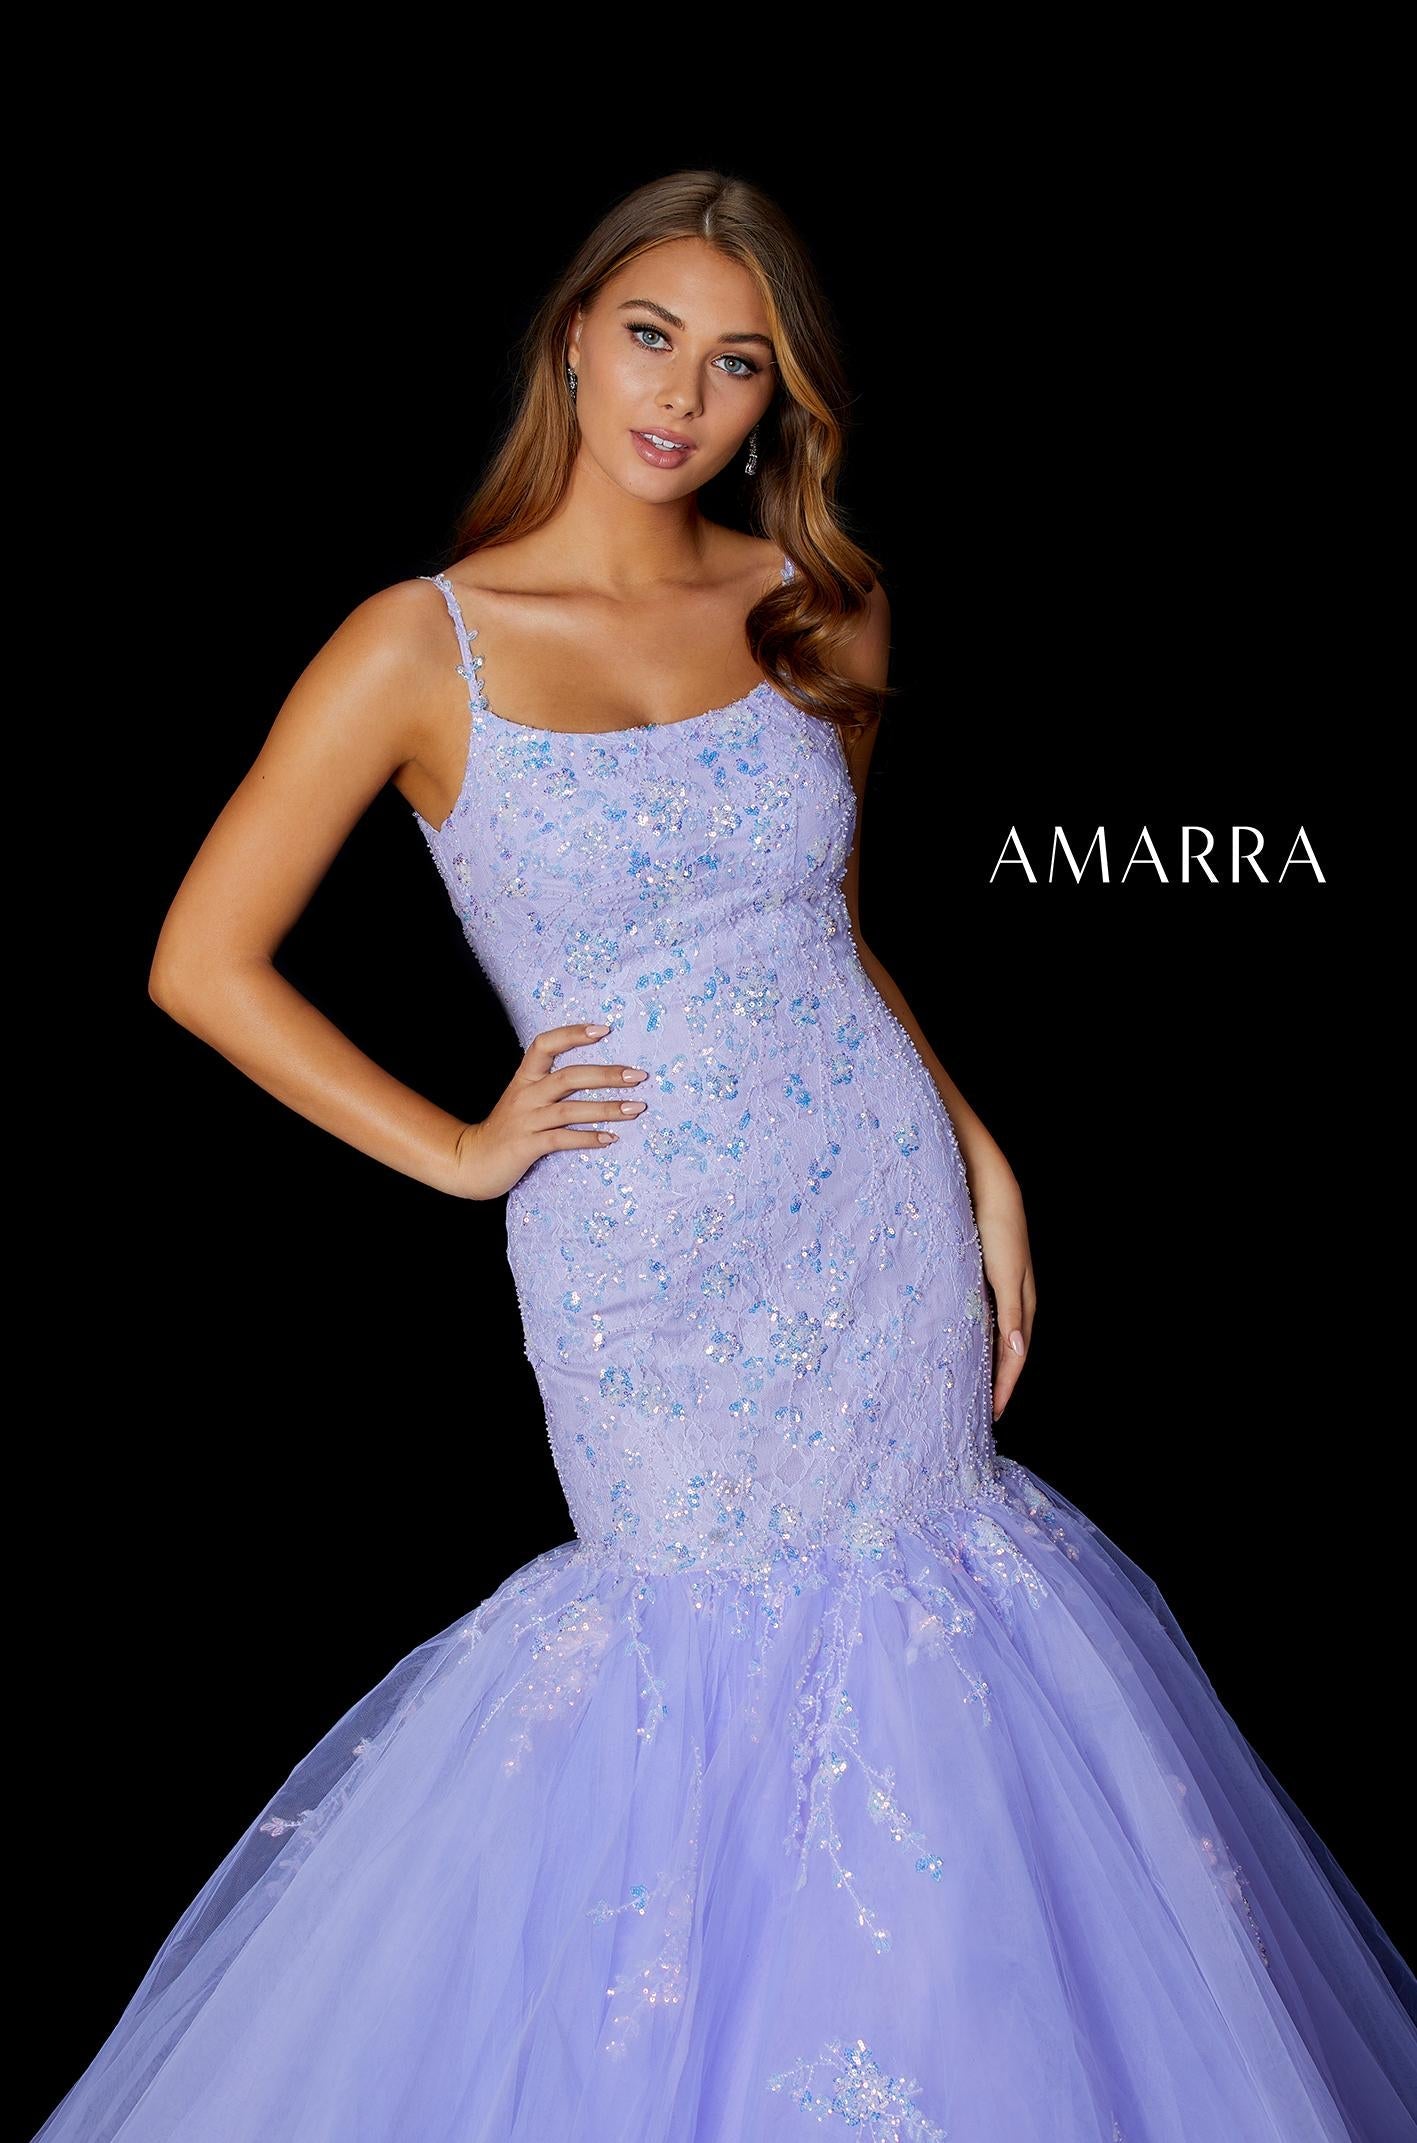 Amarra 87339 Sequin Embellished Tulle Mermaid Prom Dress Backless Corset Lace Gown extreme tulle trumpet skirt with sweeping train.   Available Sizes: 00-16  Available Colors: Light Blue, Lilac, Neon Pink